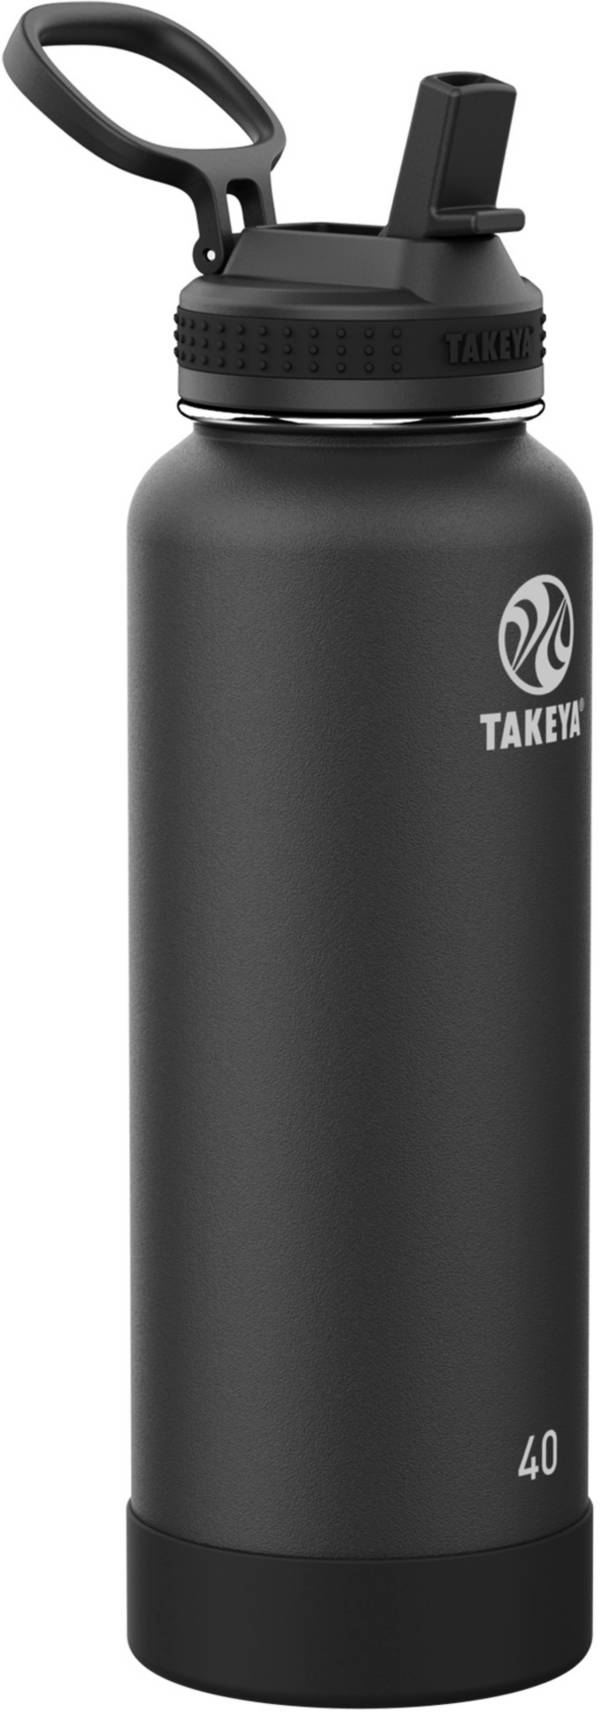 Takeya Pickleball Insulated 32 oz. Water Bottle with Straw Lid, Ace Black